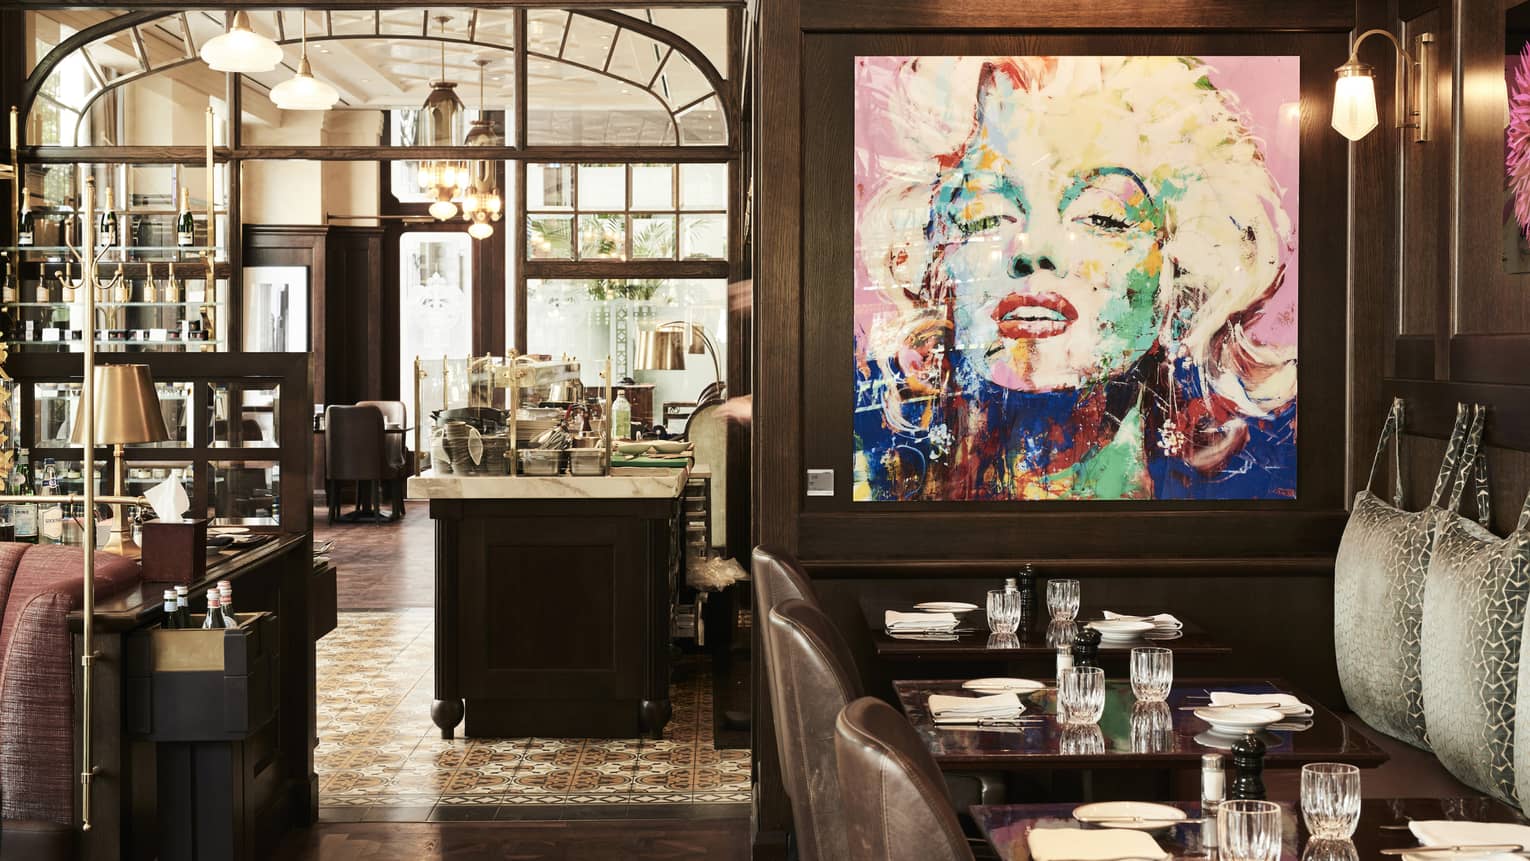 Tables in contemporary brasserie with large artwork of Marilyn Monroe 